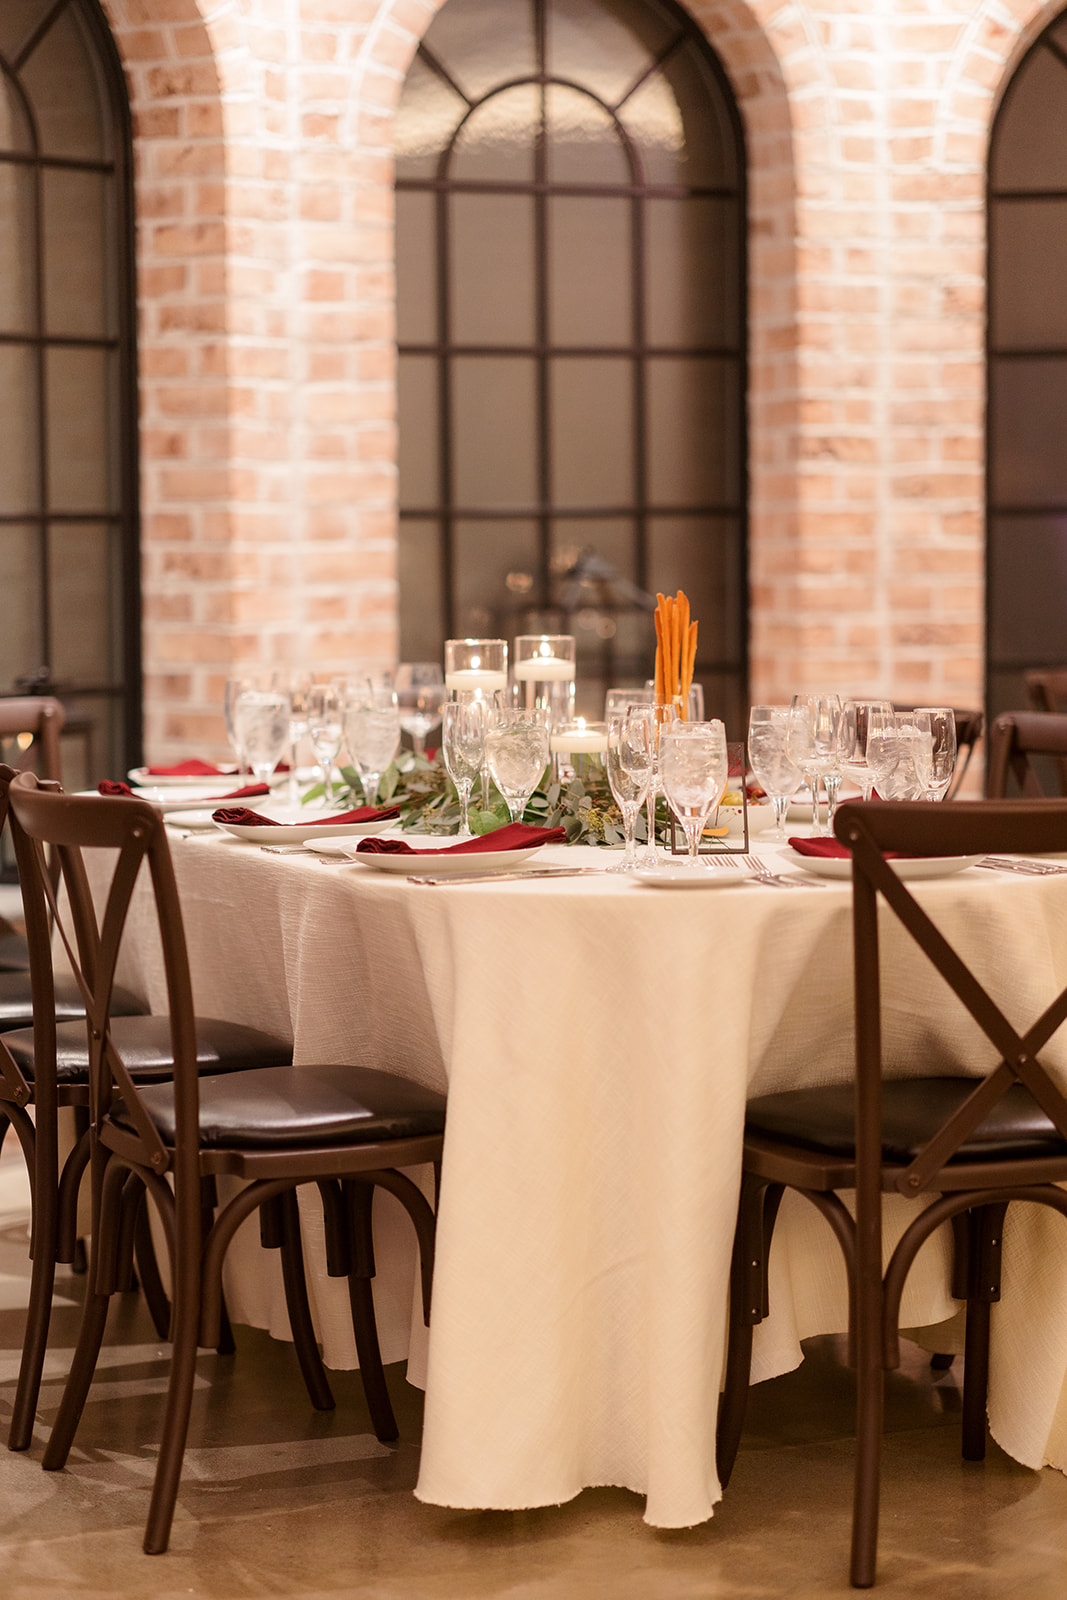 Details of a white linen dressed table with red napkins at The Refinery At Perona Farms